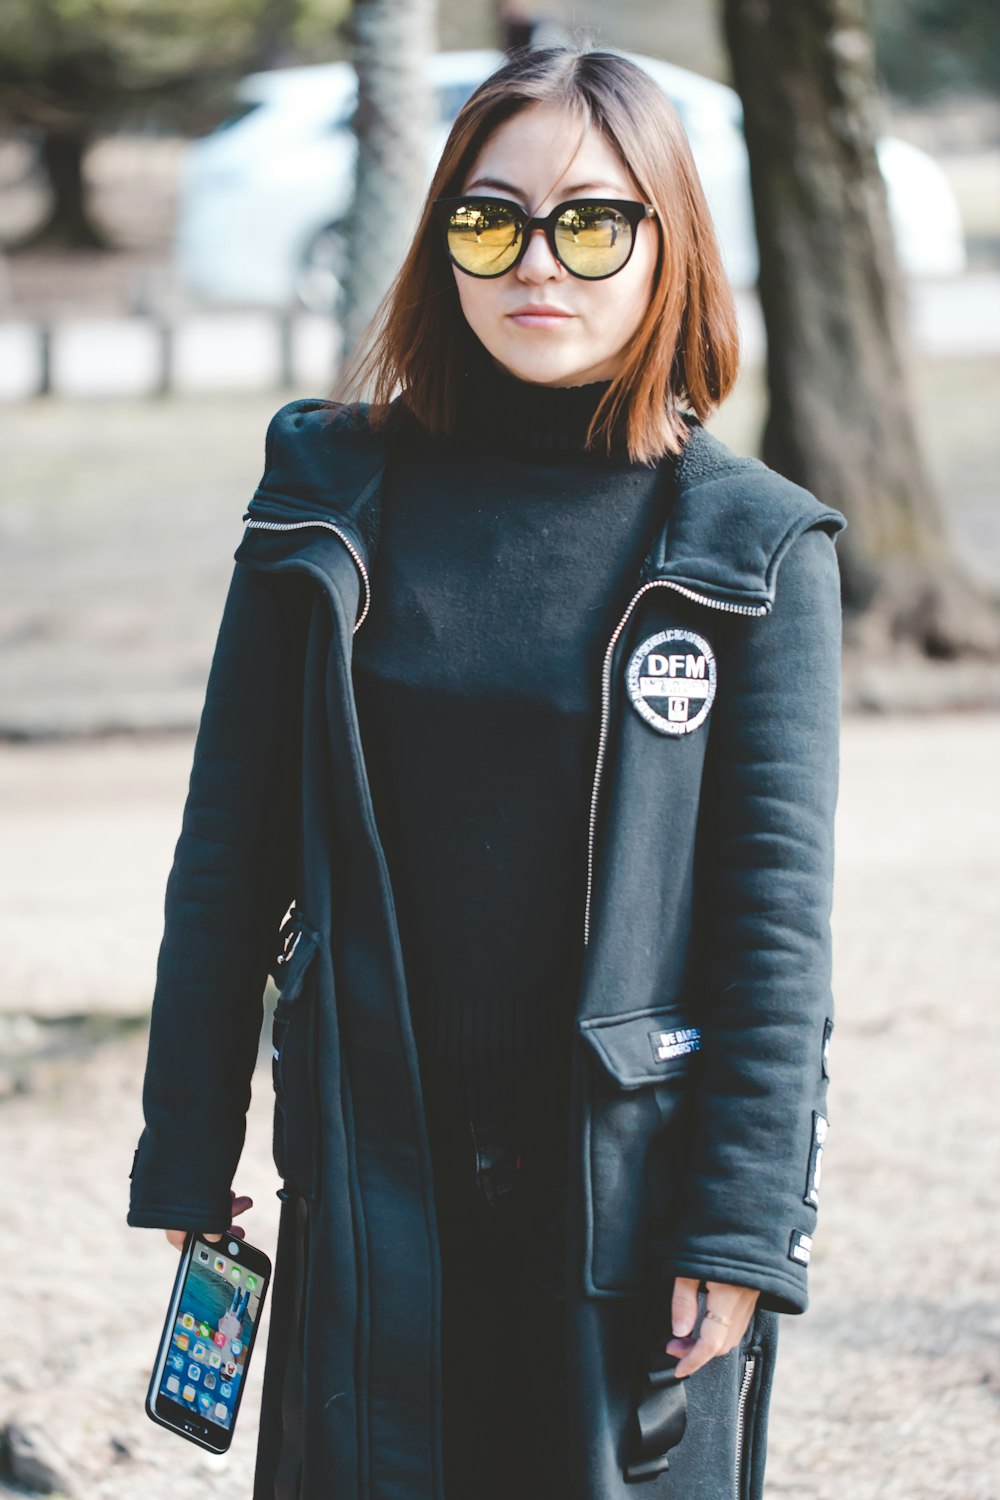 woman wearing sunglasses holding black Android smartphone